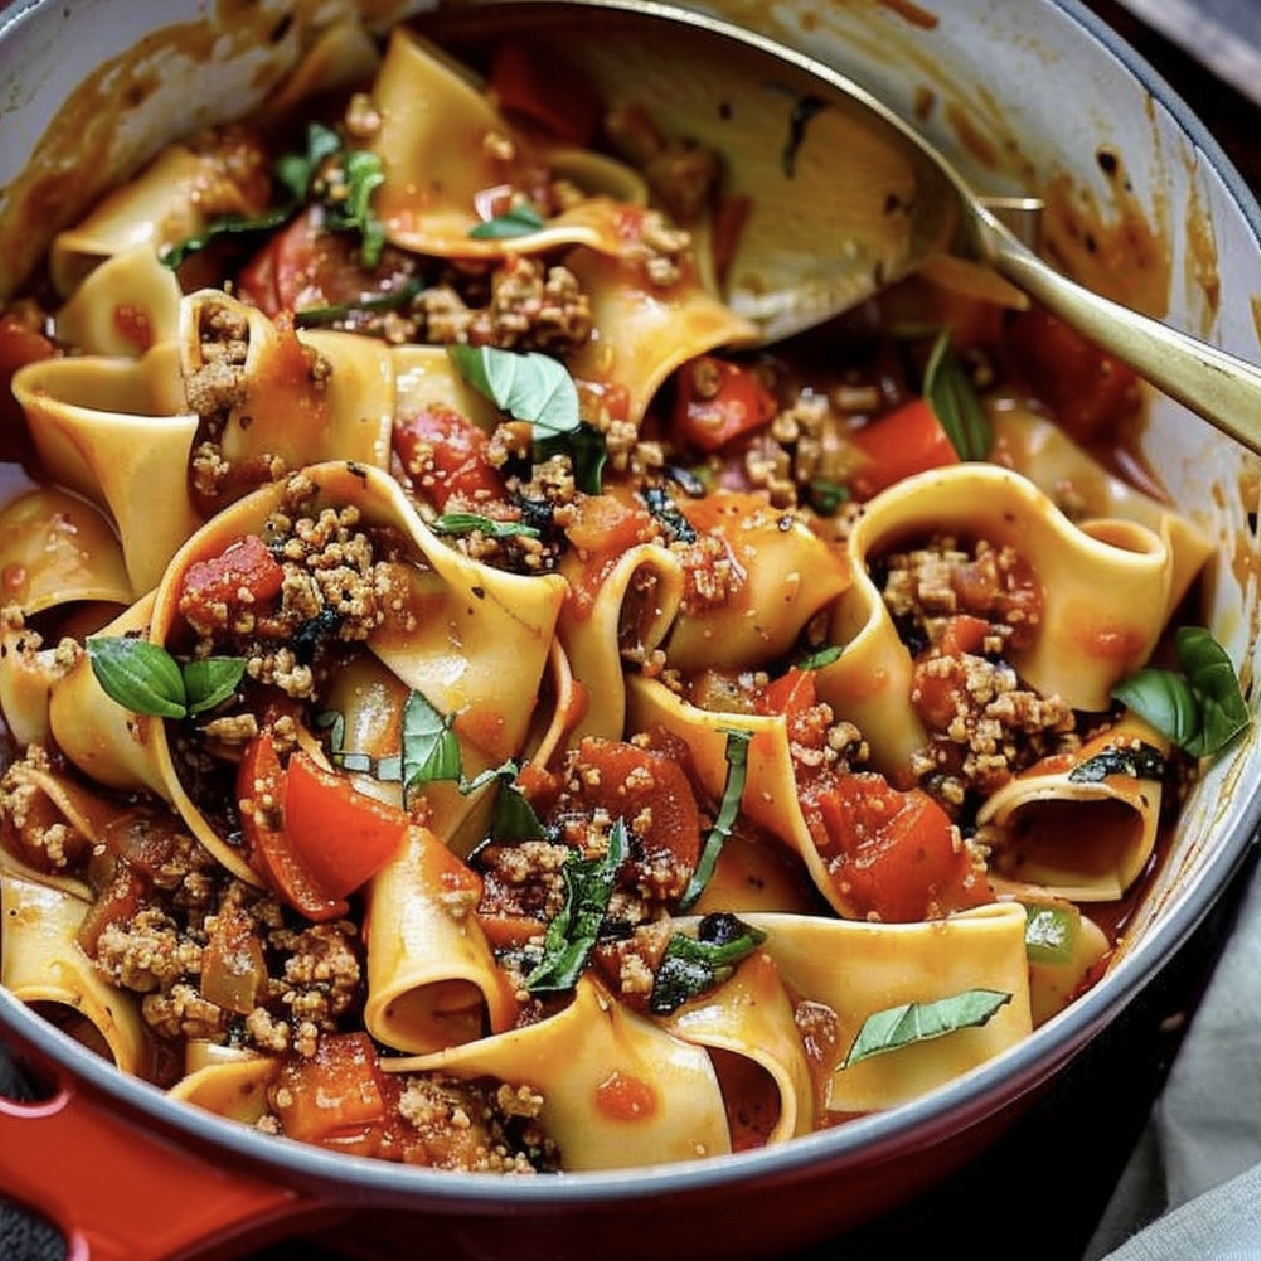 Discover the taste of tradition with our Italian Drunken Noodles recipe, perfect for a family feast!"